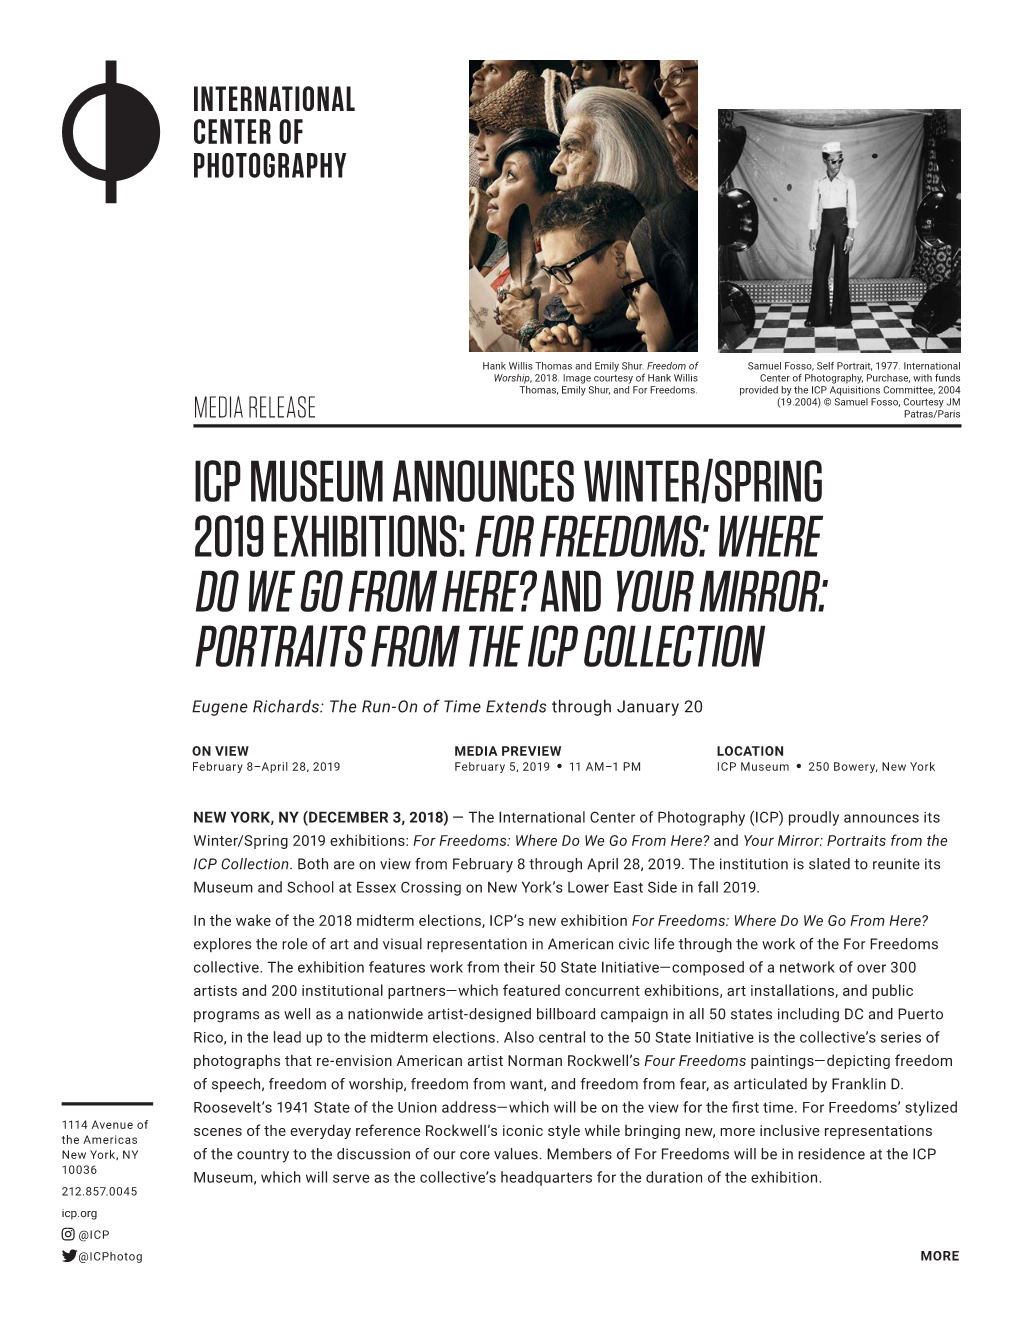 2019 Exhibitions: for Freedoms: Where Do We Go from Here? and Your Mirror: Portraits from the Icp Collection